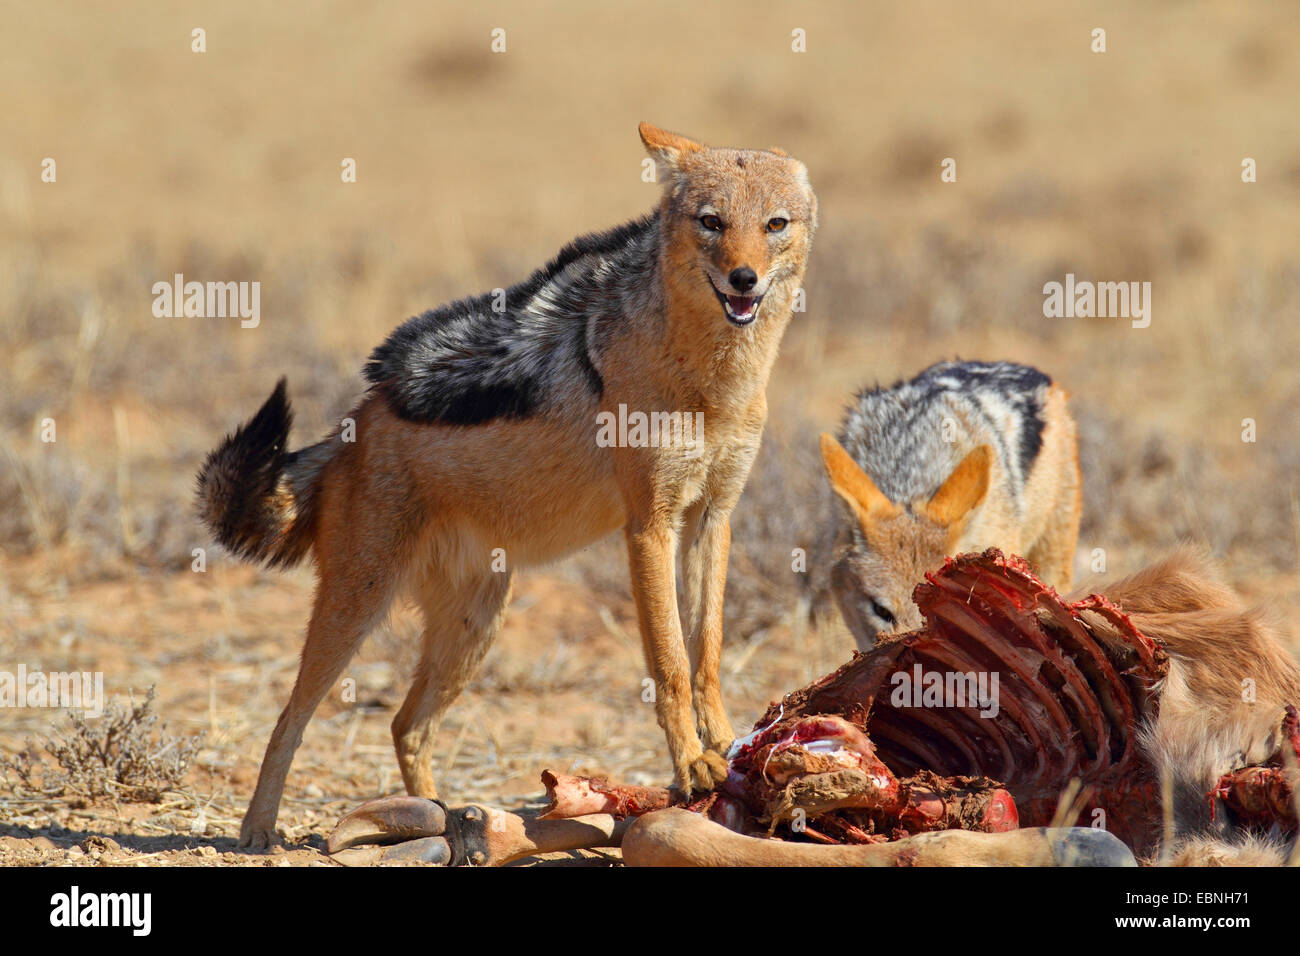 black-backed jackal (Canis mesomelas), two jackals eating at a dead wildebeest, South Africa, Kgalagadi Transfrontier National Park Stock Photo